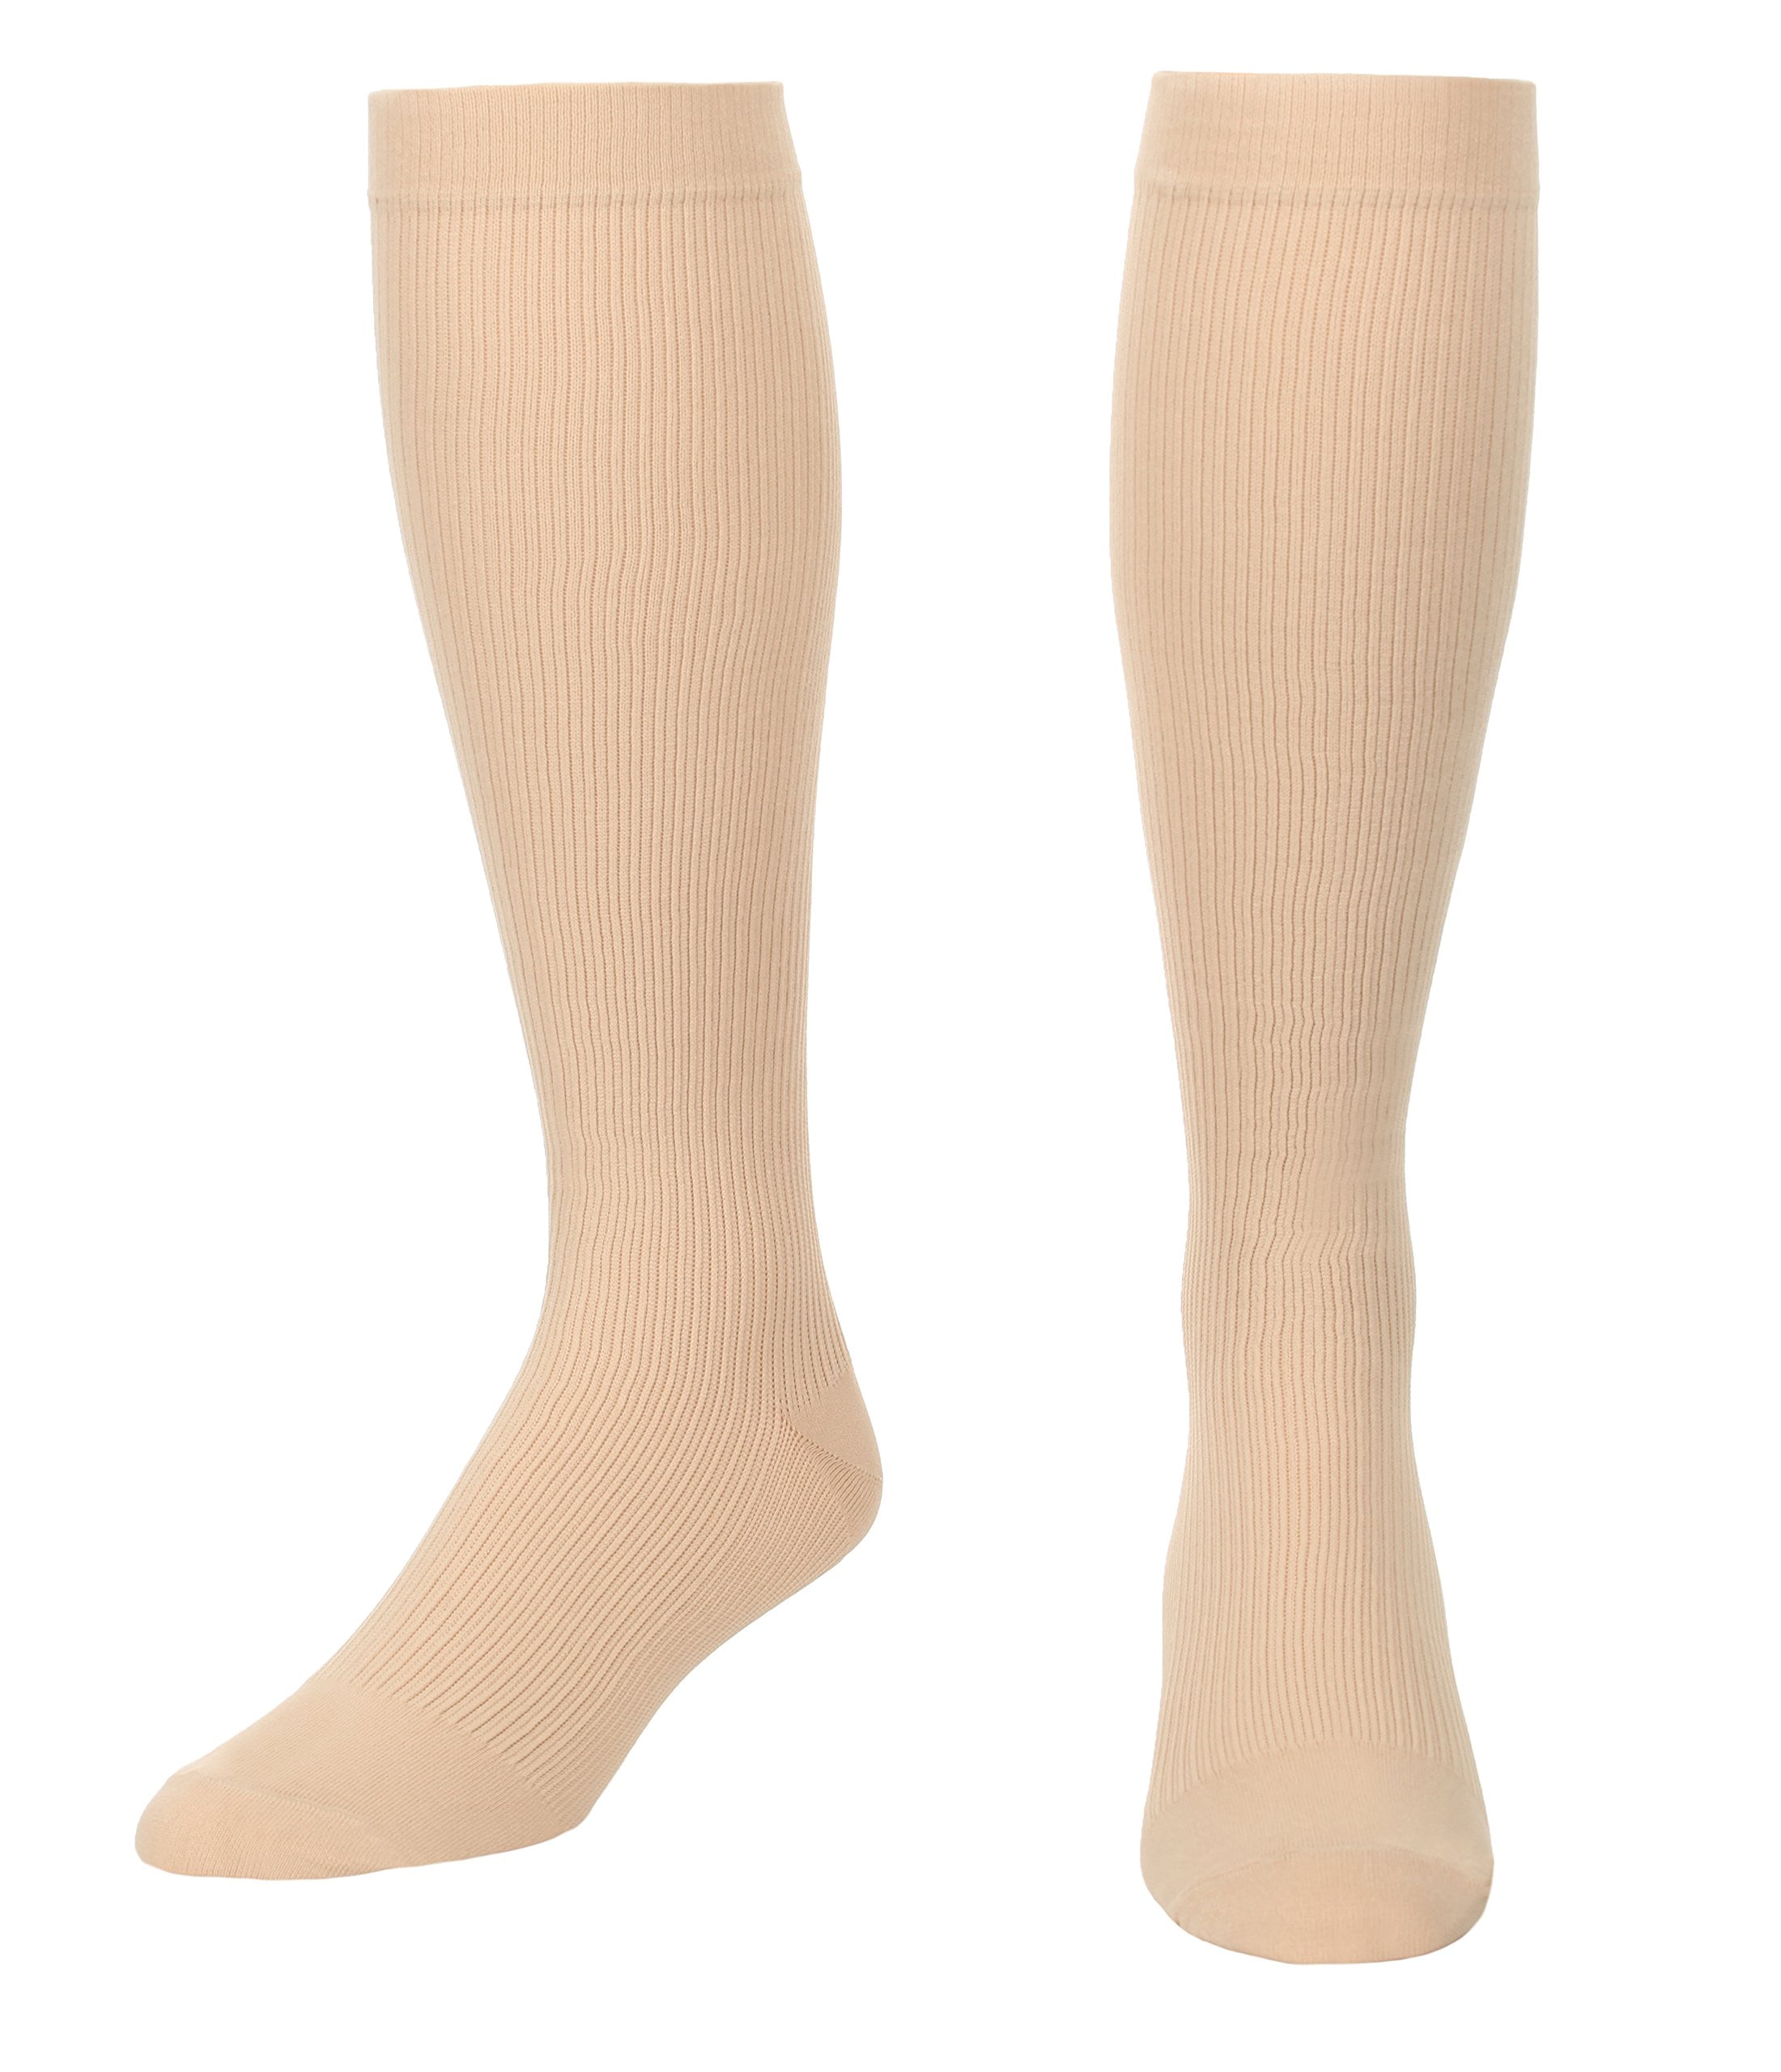 Medical Compression Socks For Men Made in the USA, Firm Graduated ...